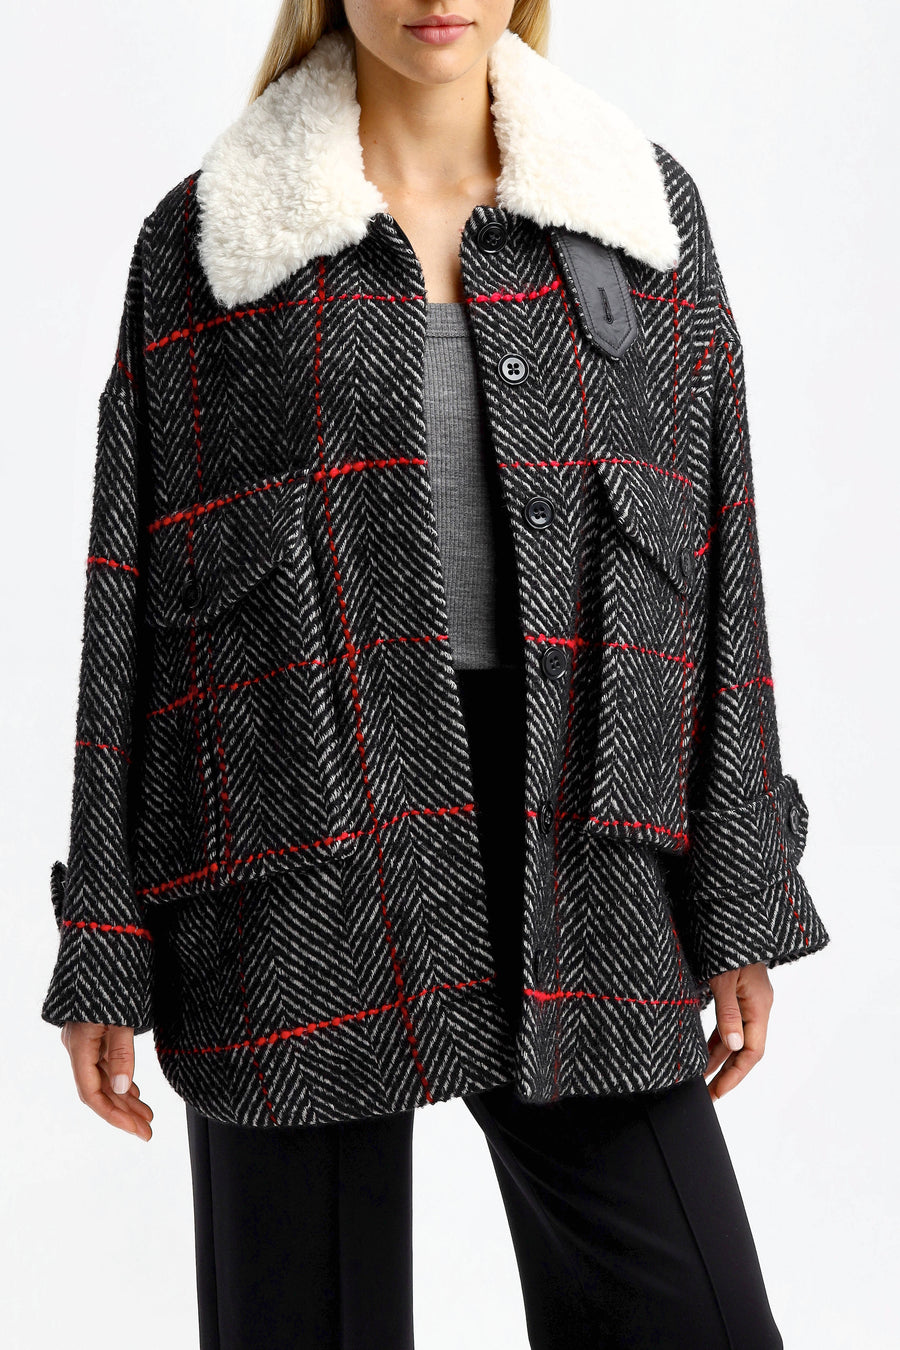 Jacket Graphic Chic in black / red